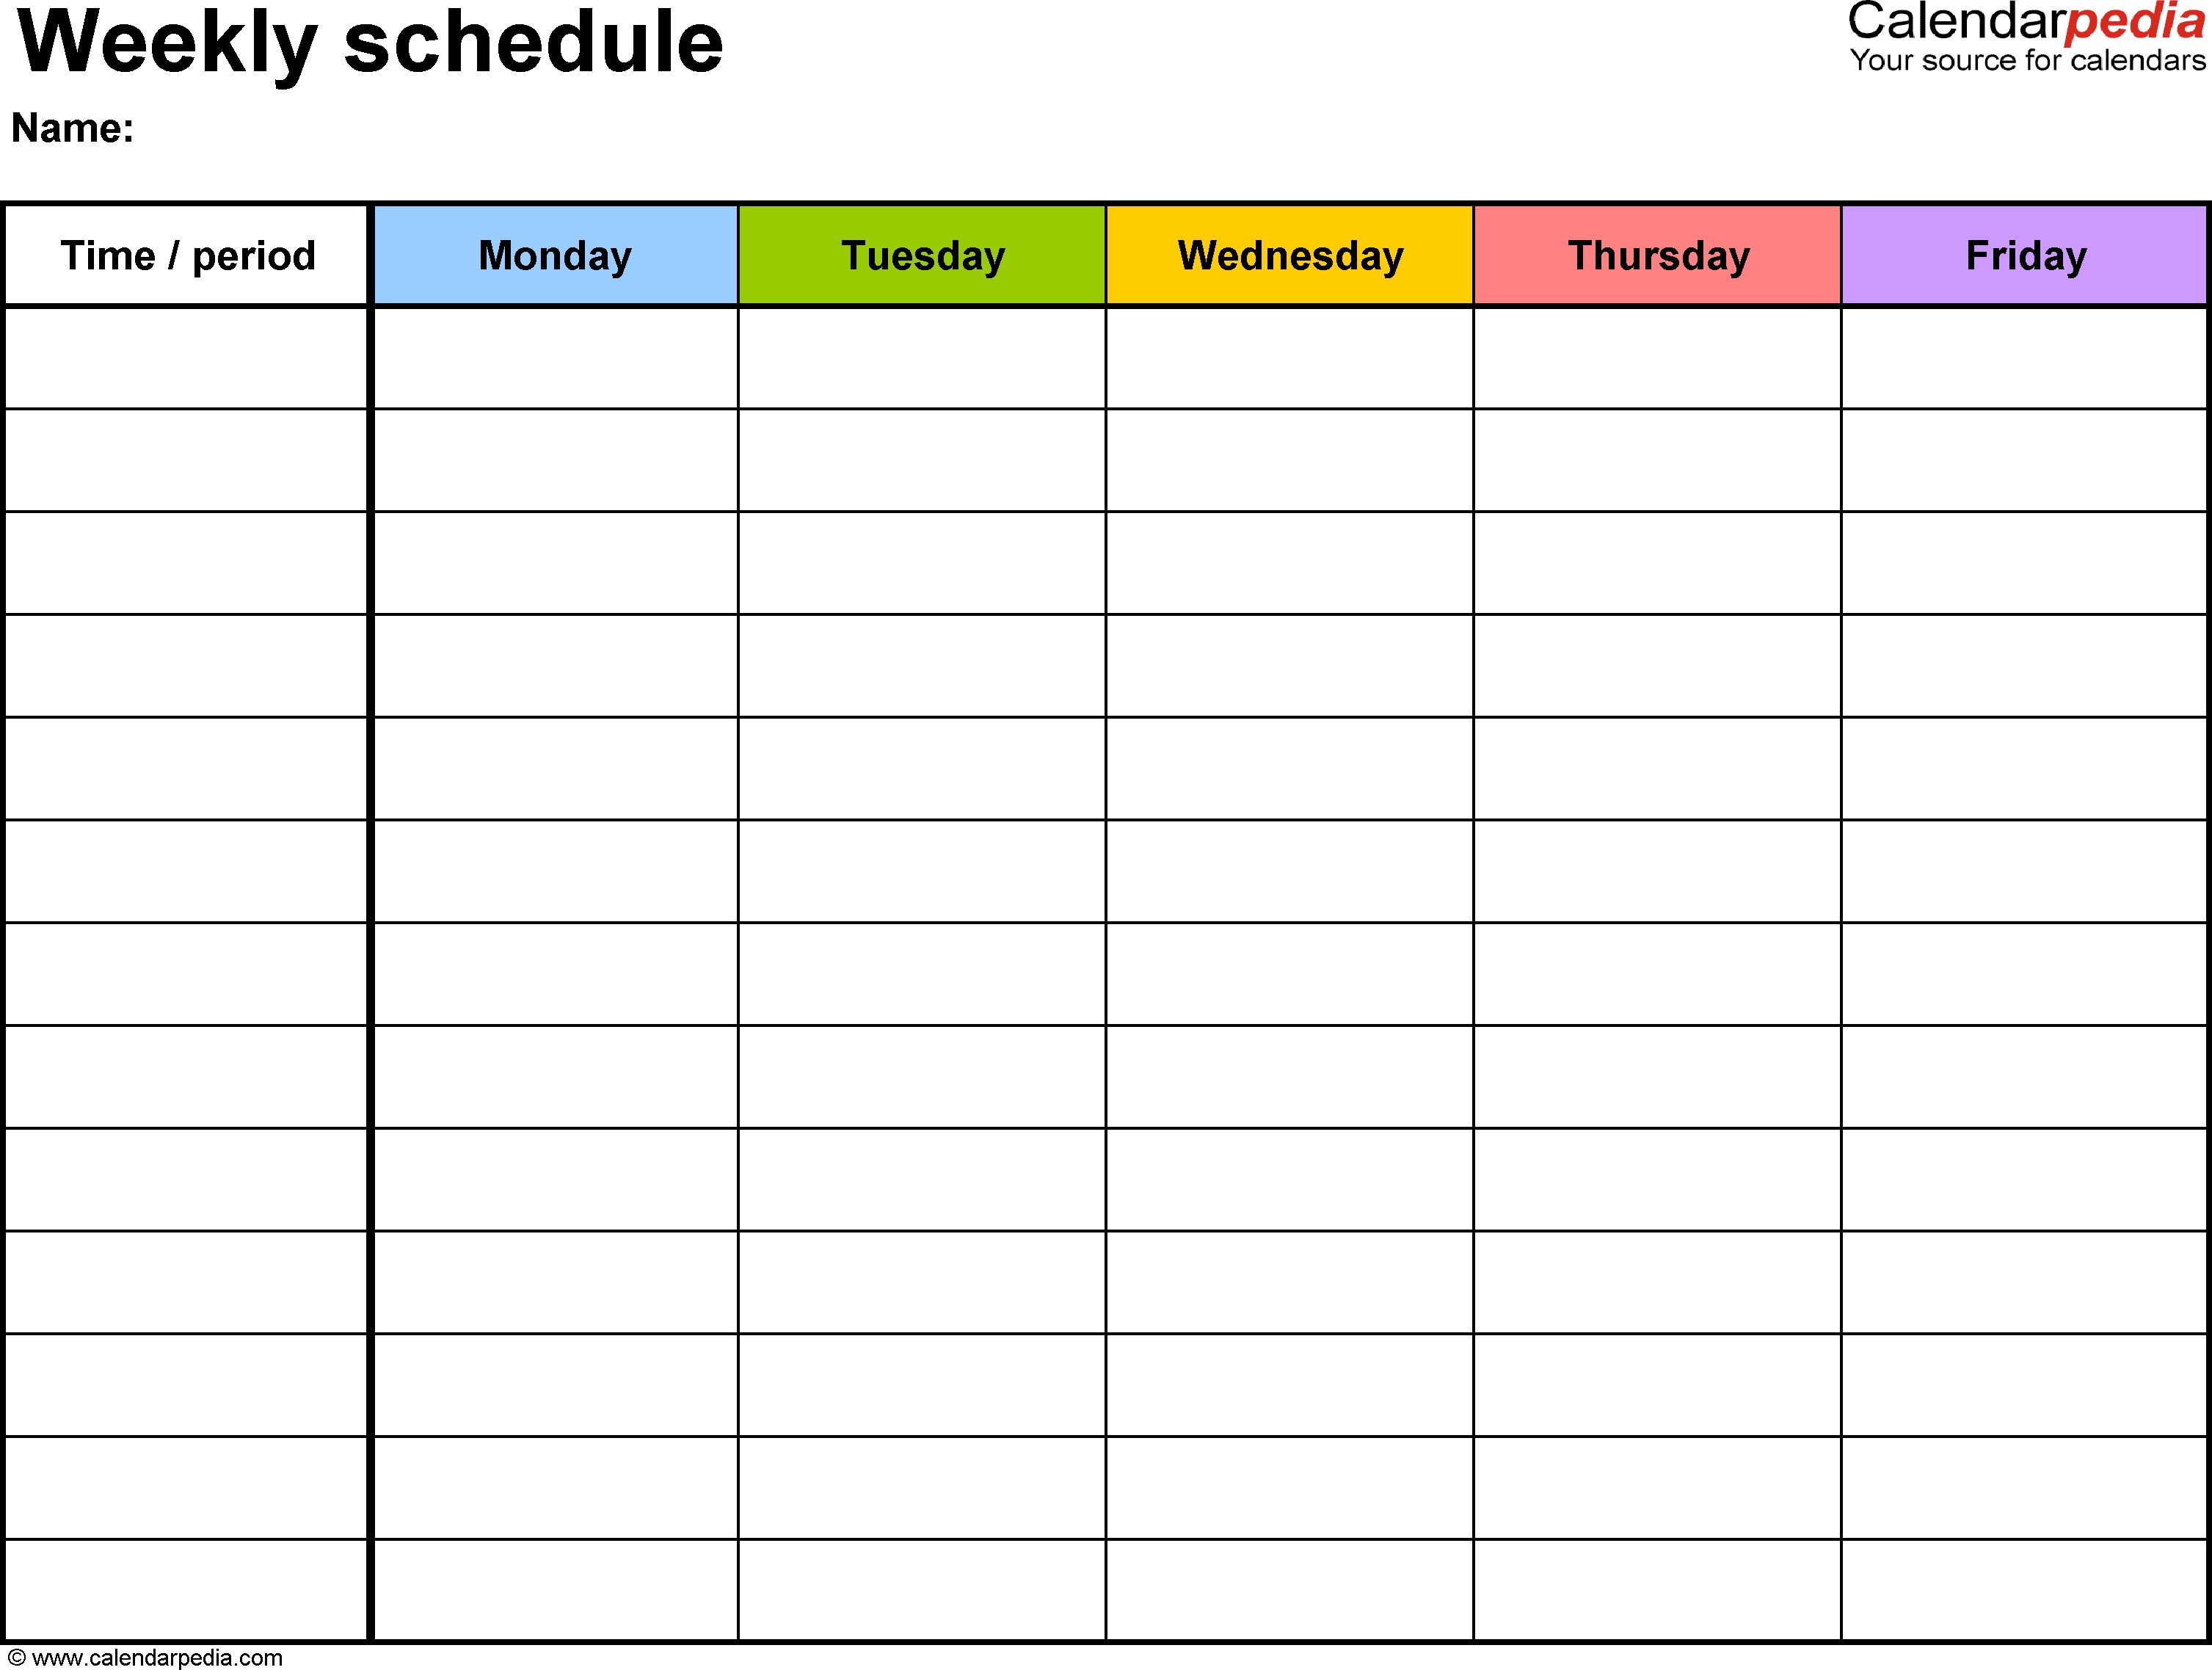 Free Weekly Schedule Templates For Word - 18 Templates-Monday Through Friday Planning Template